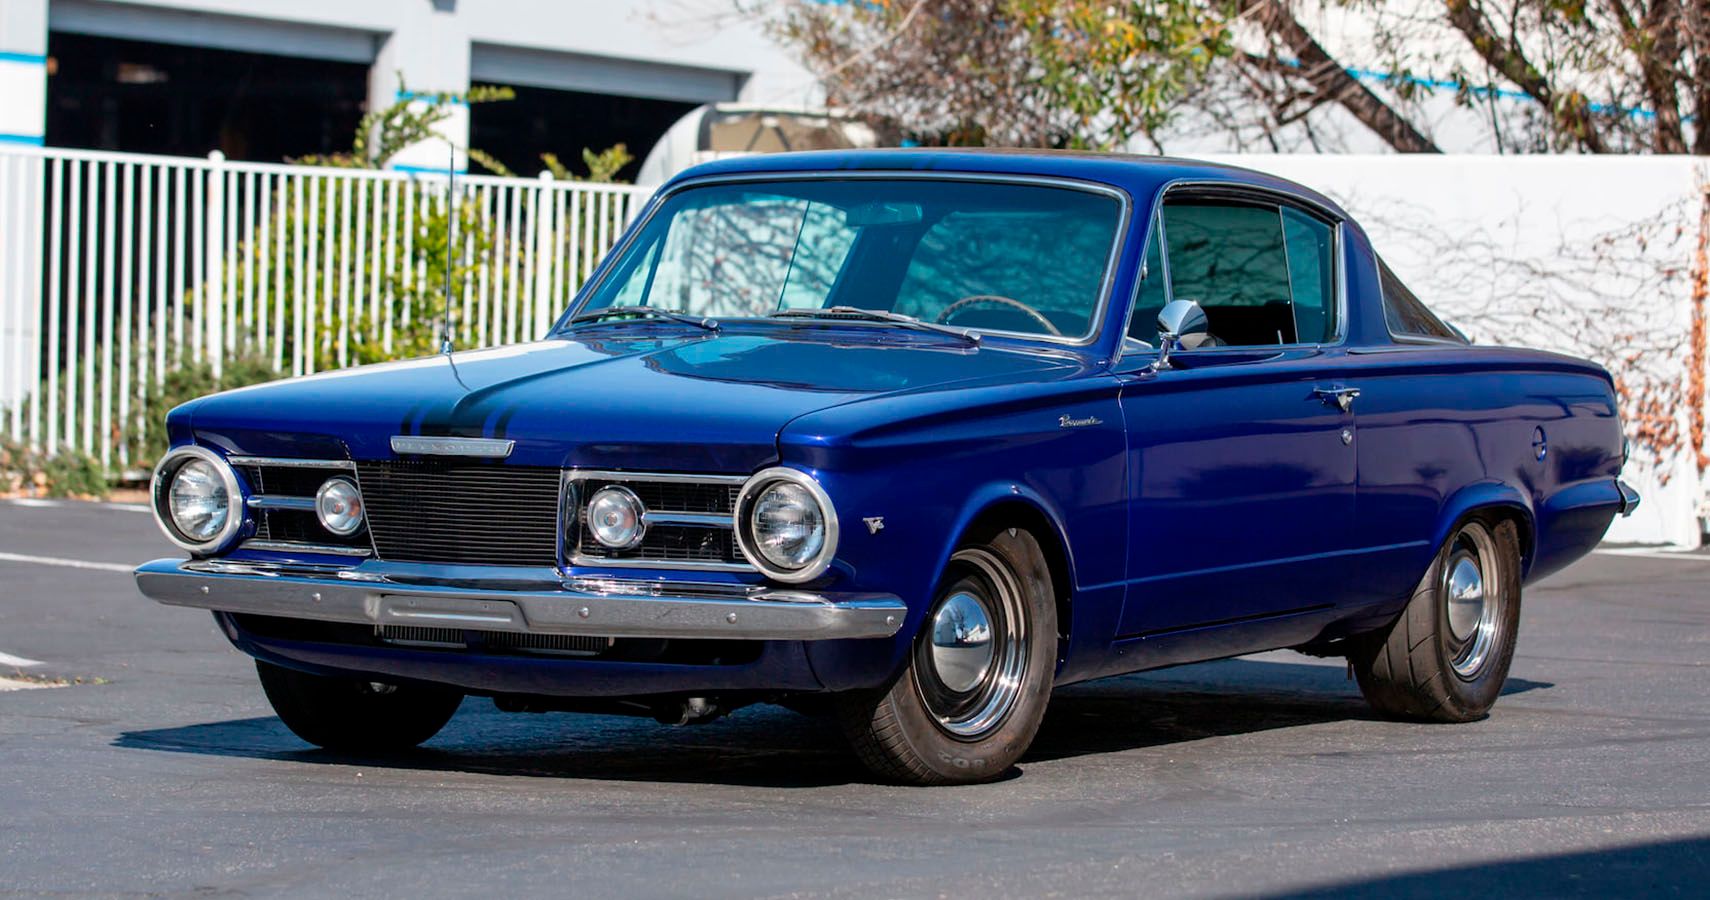 10 Reasons Why The 1965 Plymouth Barracuda Is One Of The Coolest American Muscle Cars